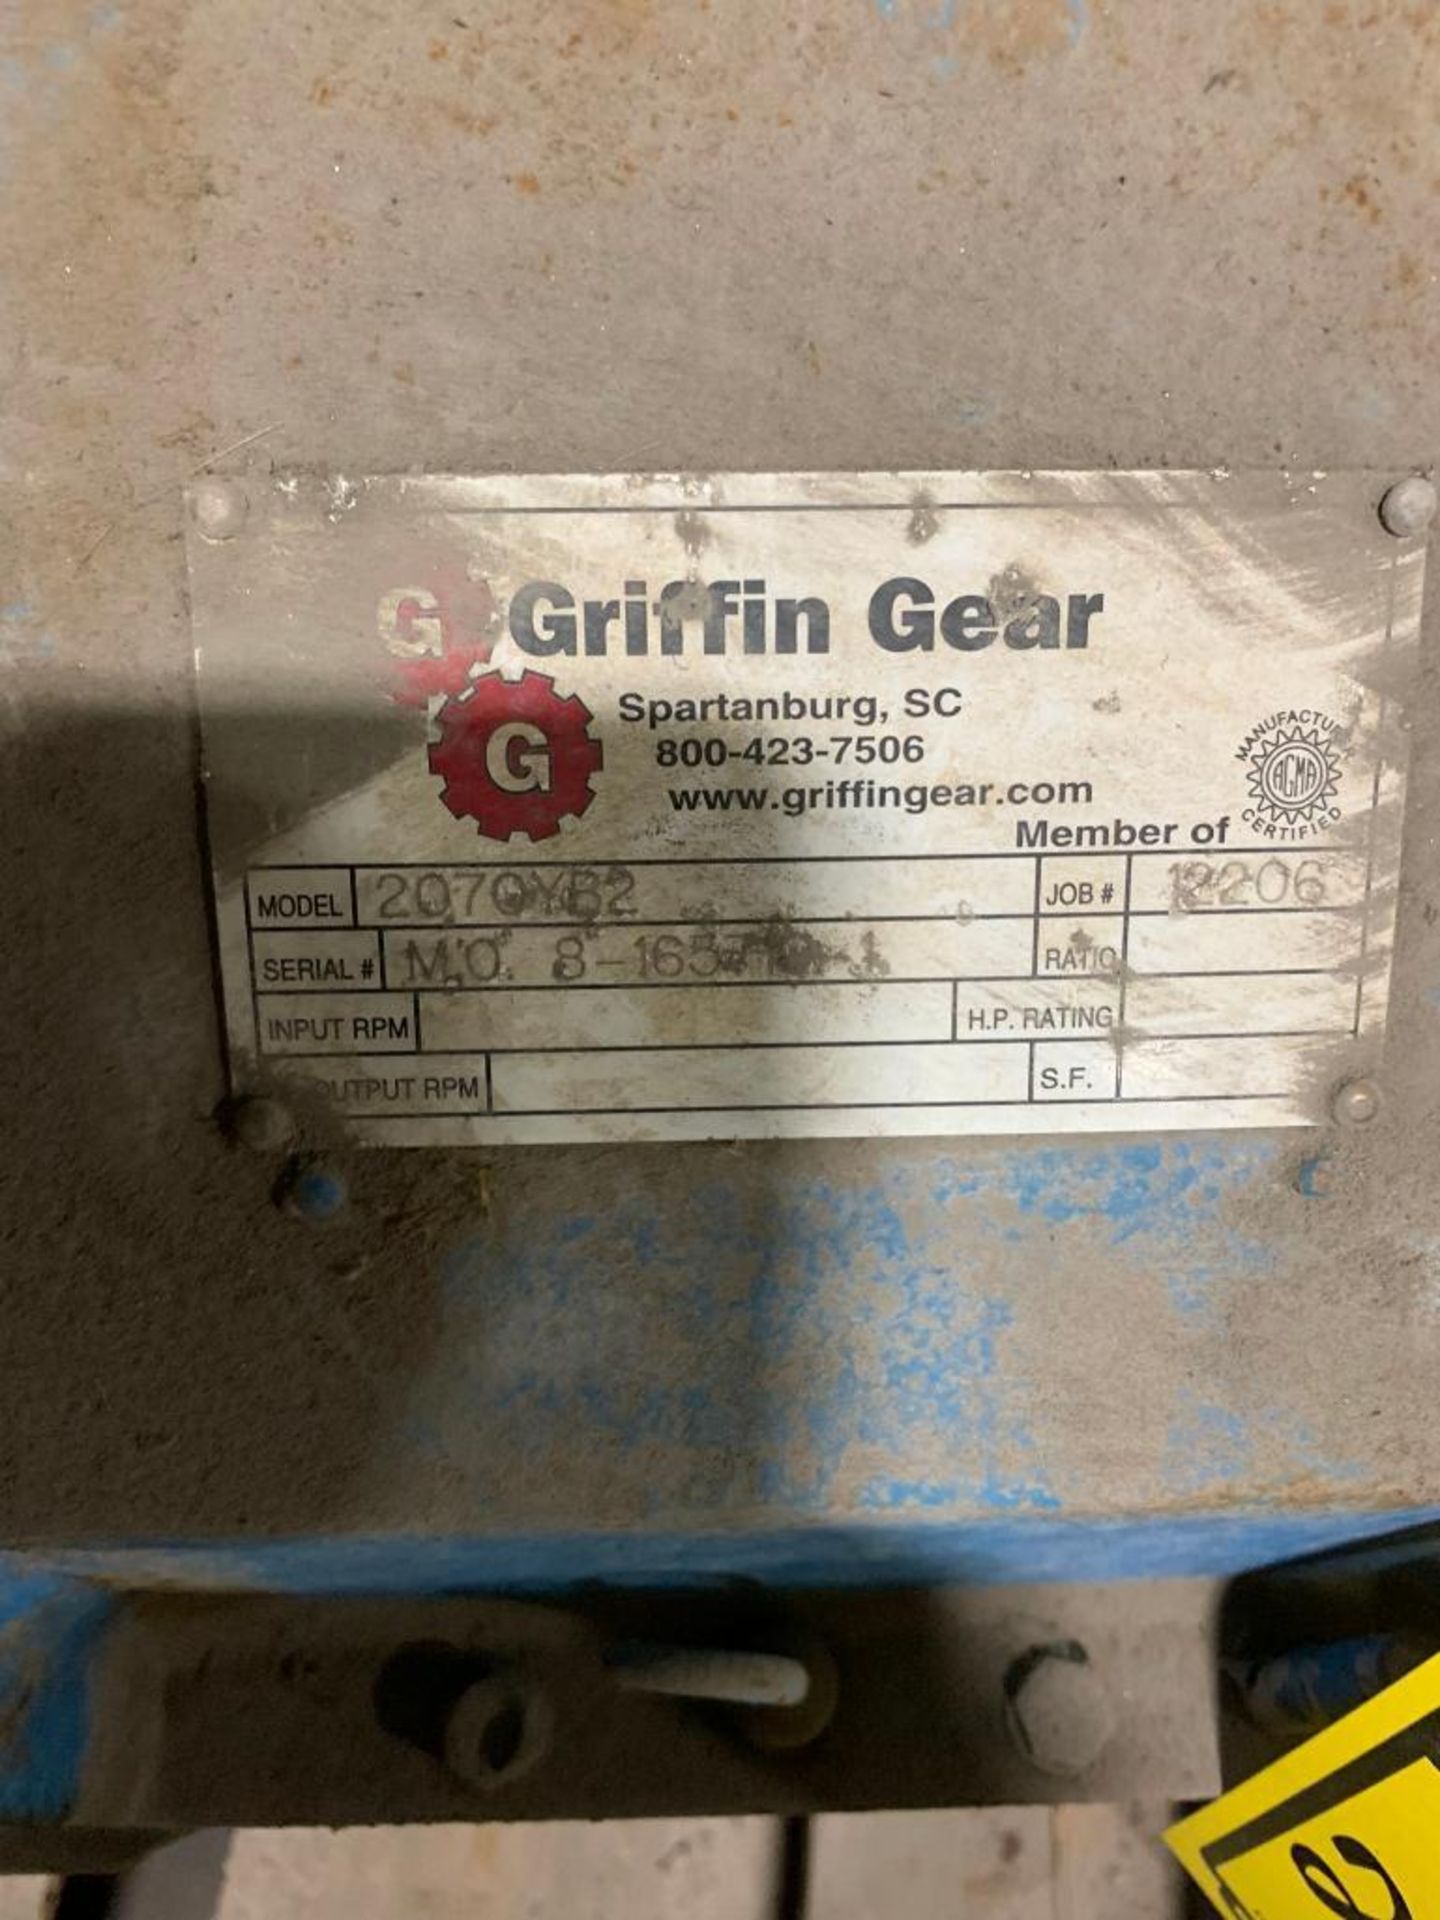 Griffin Gear Speed Reducer, Model 2070YB2 - Image 5 of 5